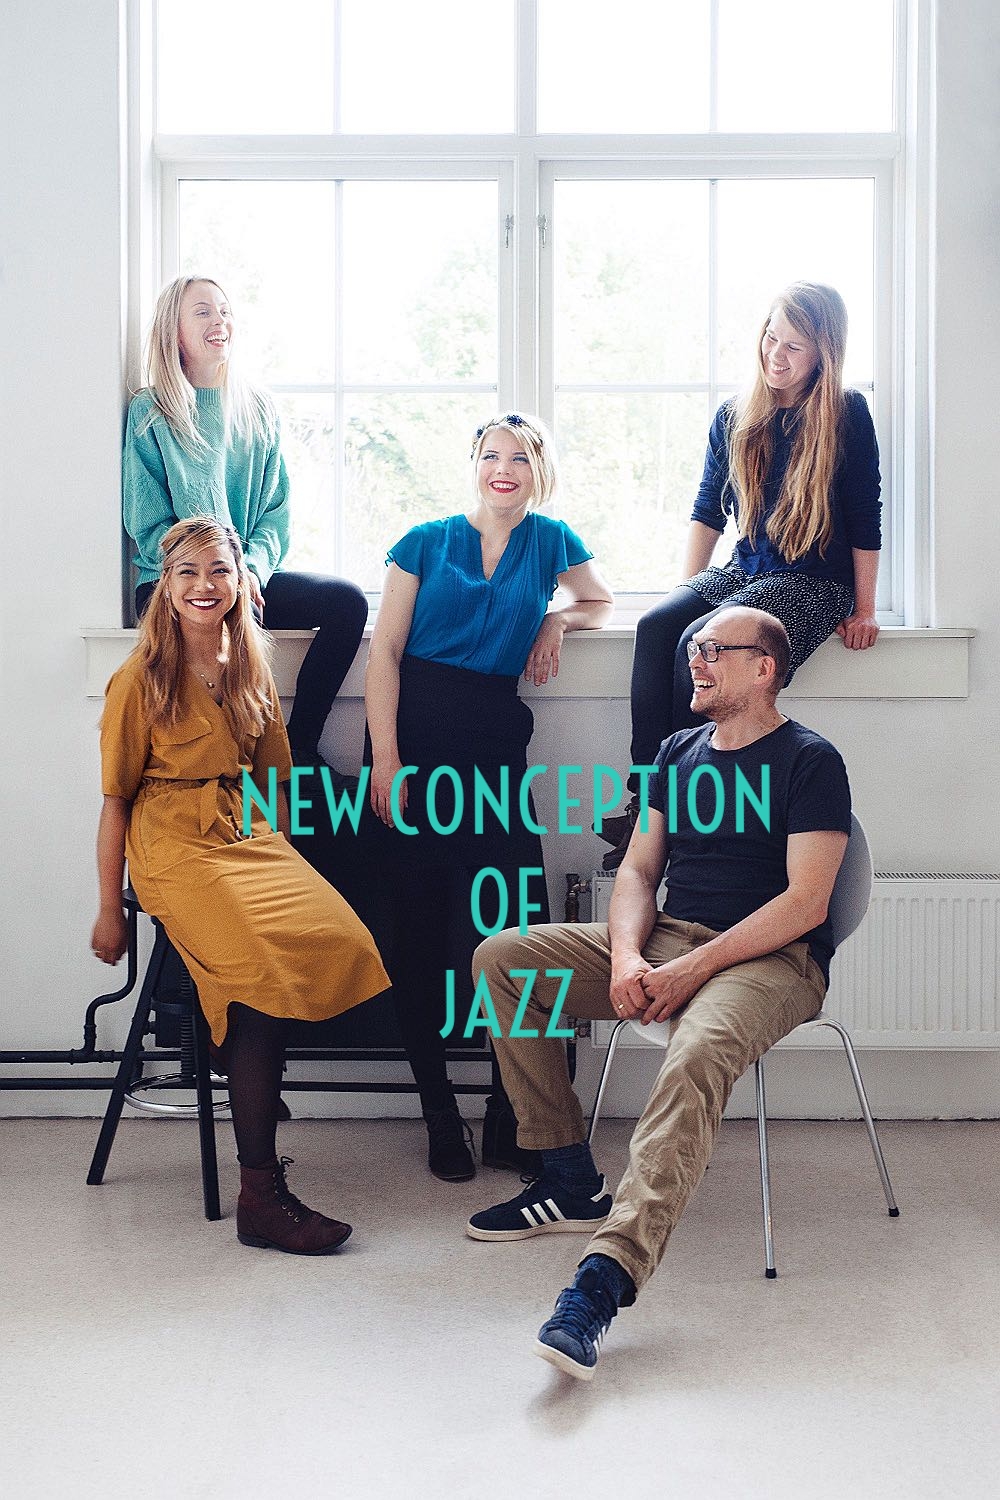 Bugge-Wesseltofts-New-Conception-Of-Jazz-1no-photo-credit.jpg